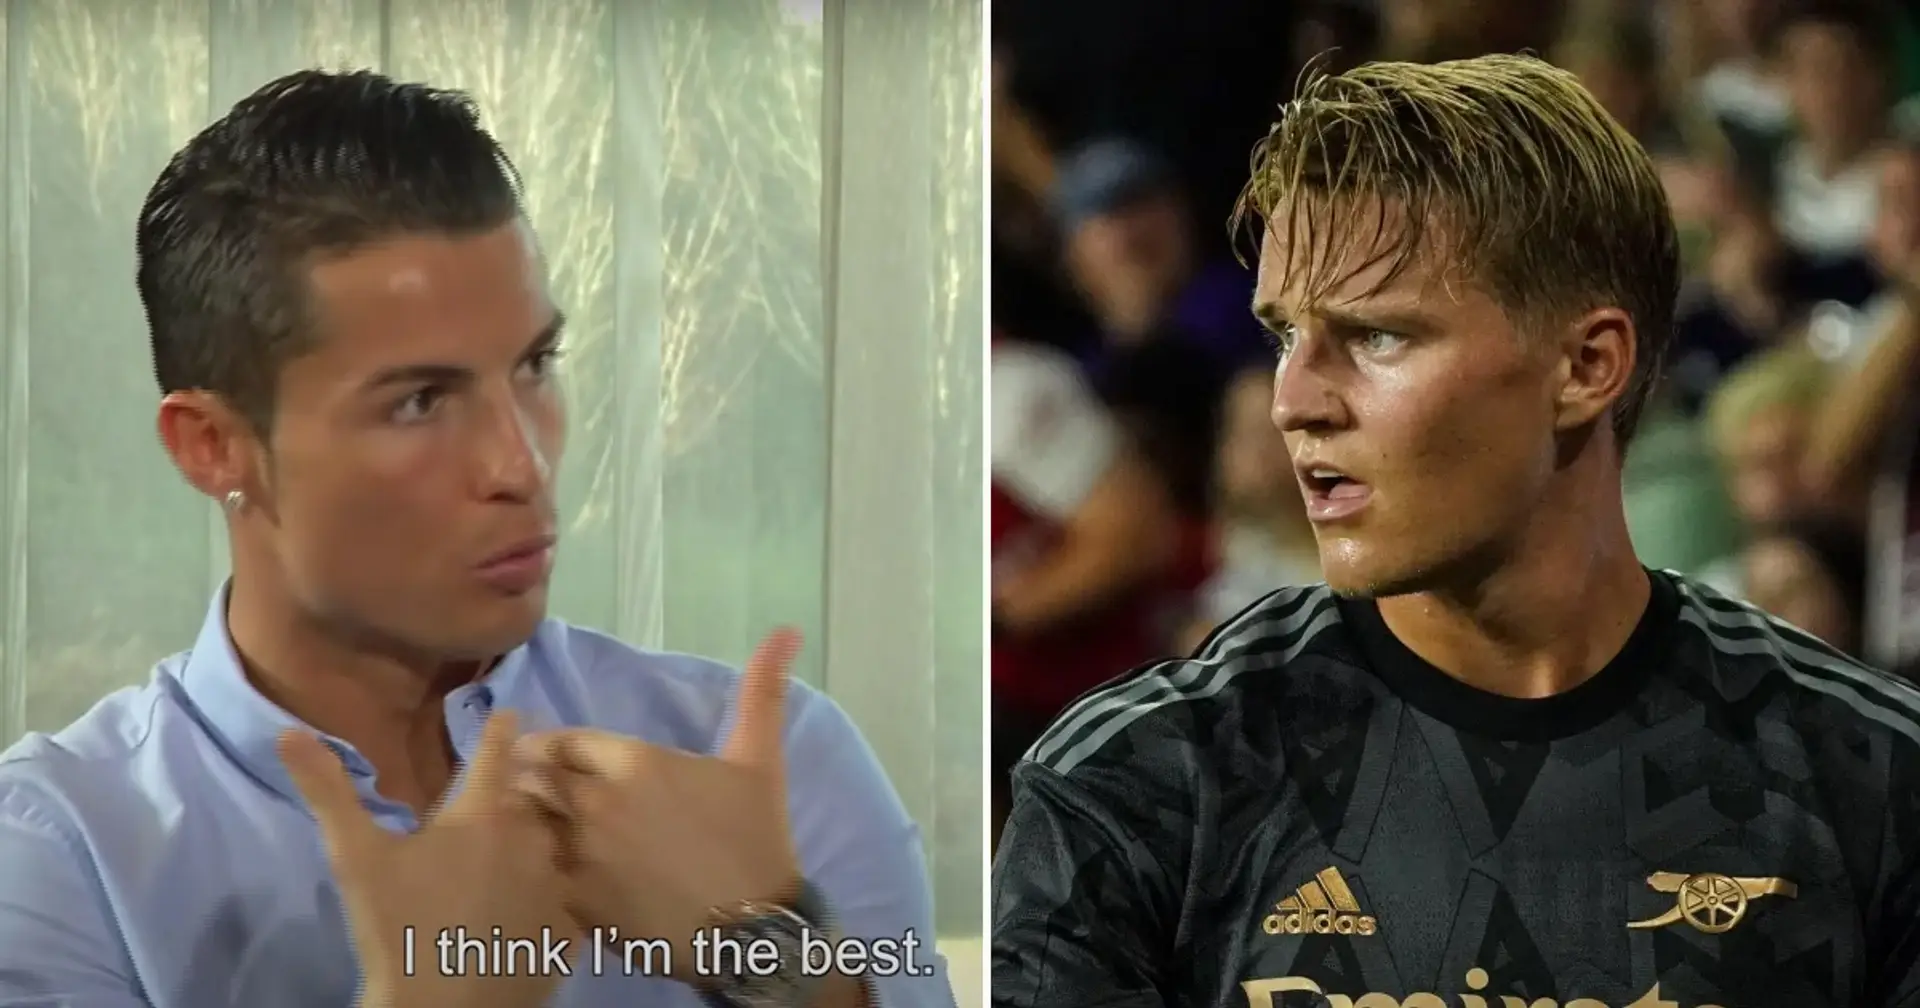 'In a couple of years...': Recalling what Cristiano Ronaldo said about Martin Odegaard in 2015